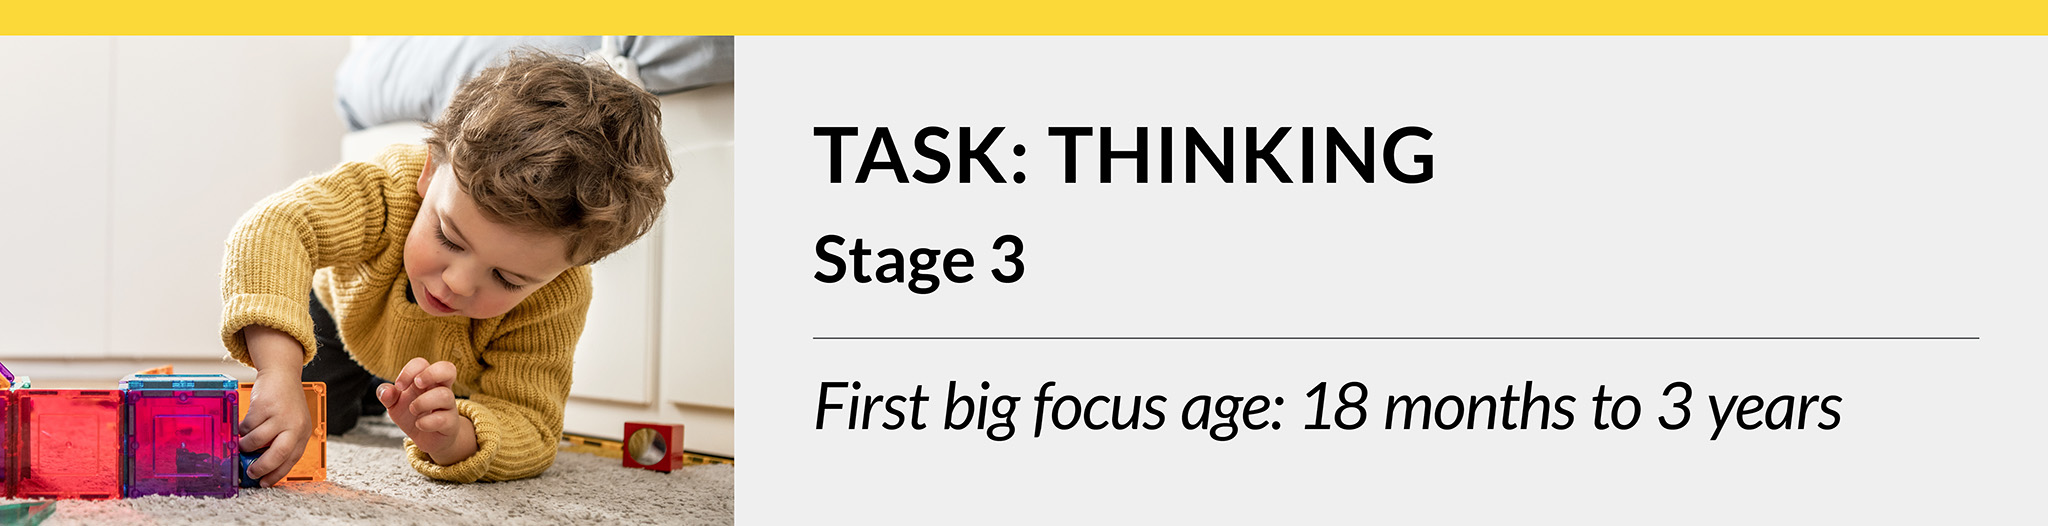 Task: Thinking. Stage 3. First big focus age: 18 months to 3 years.